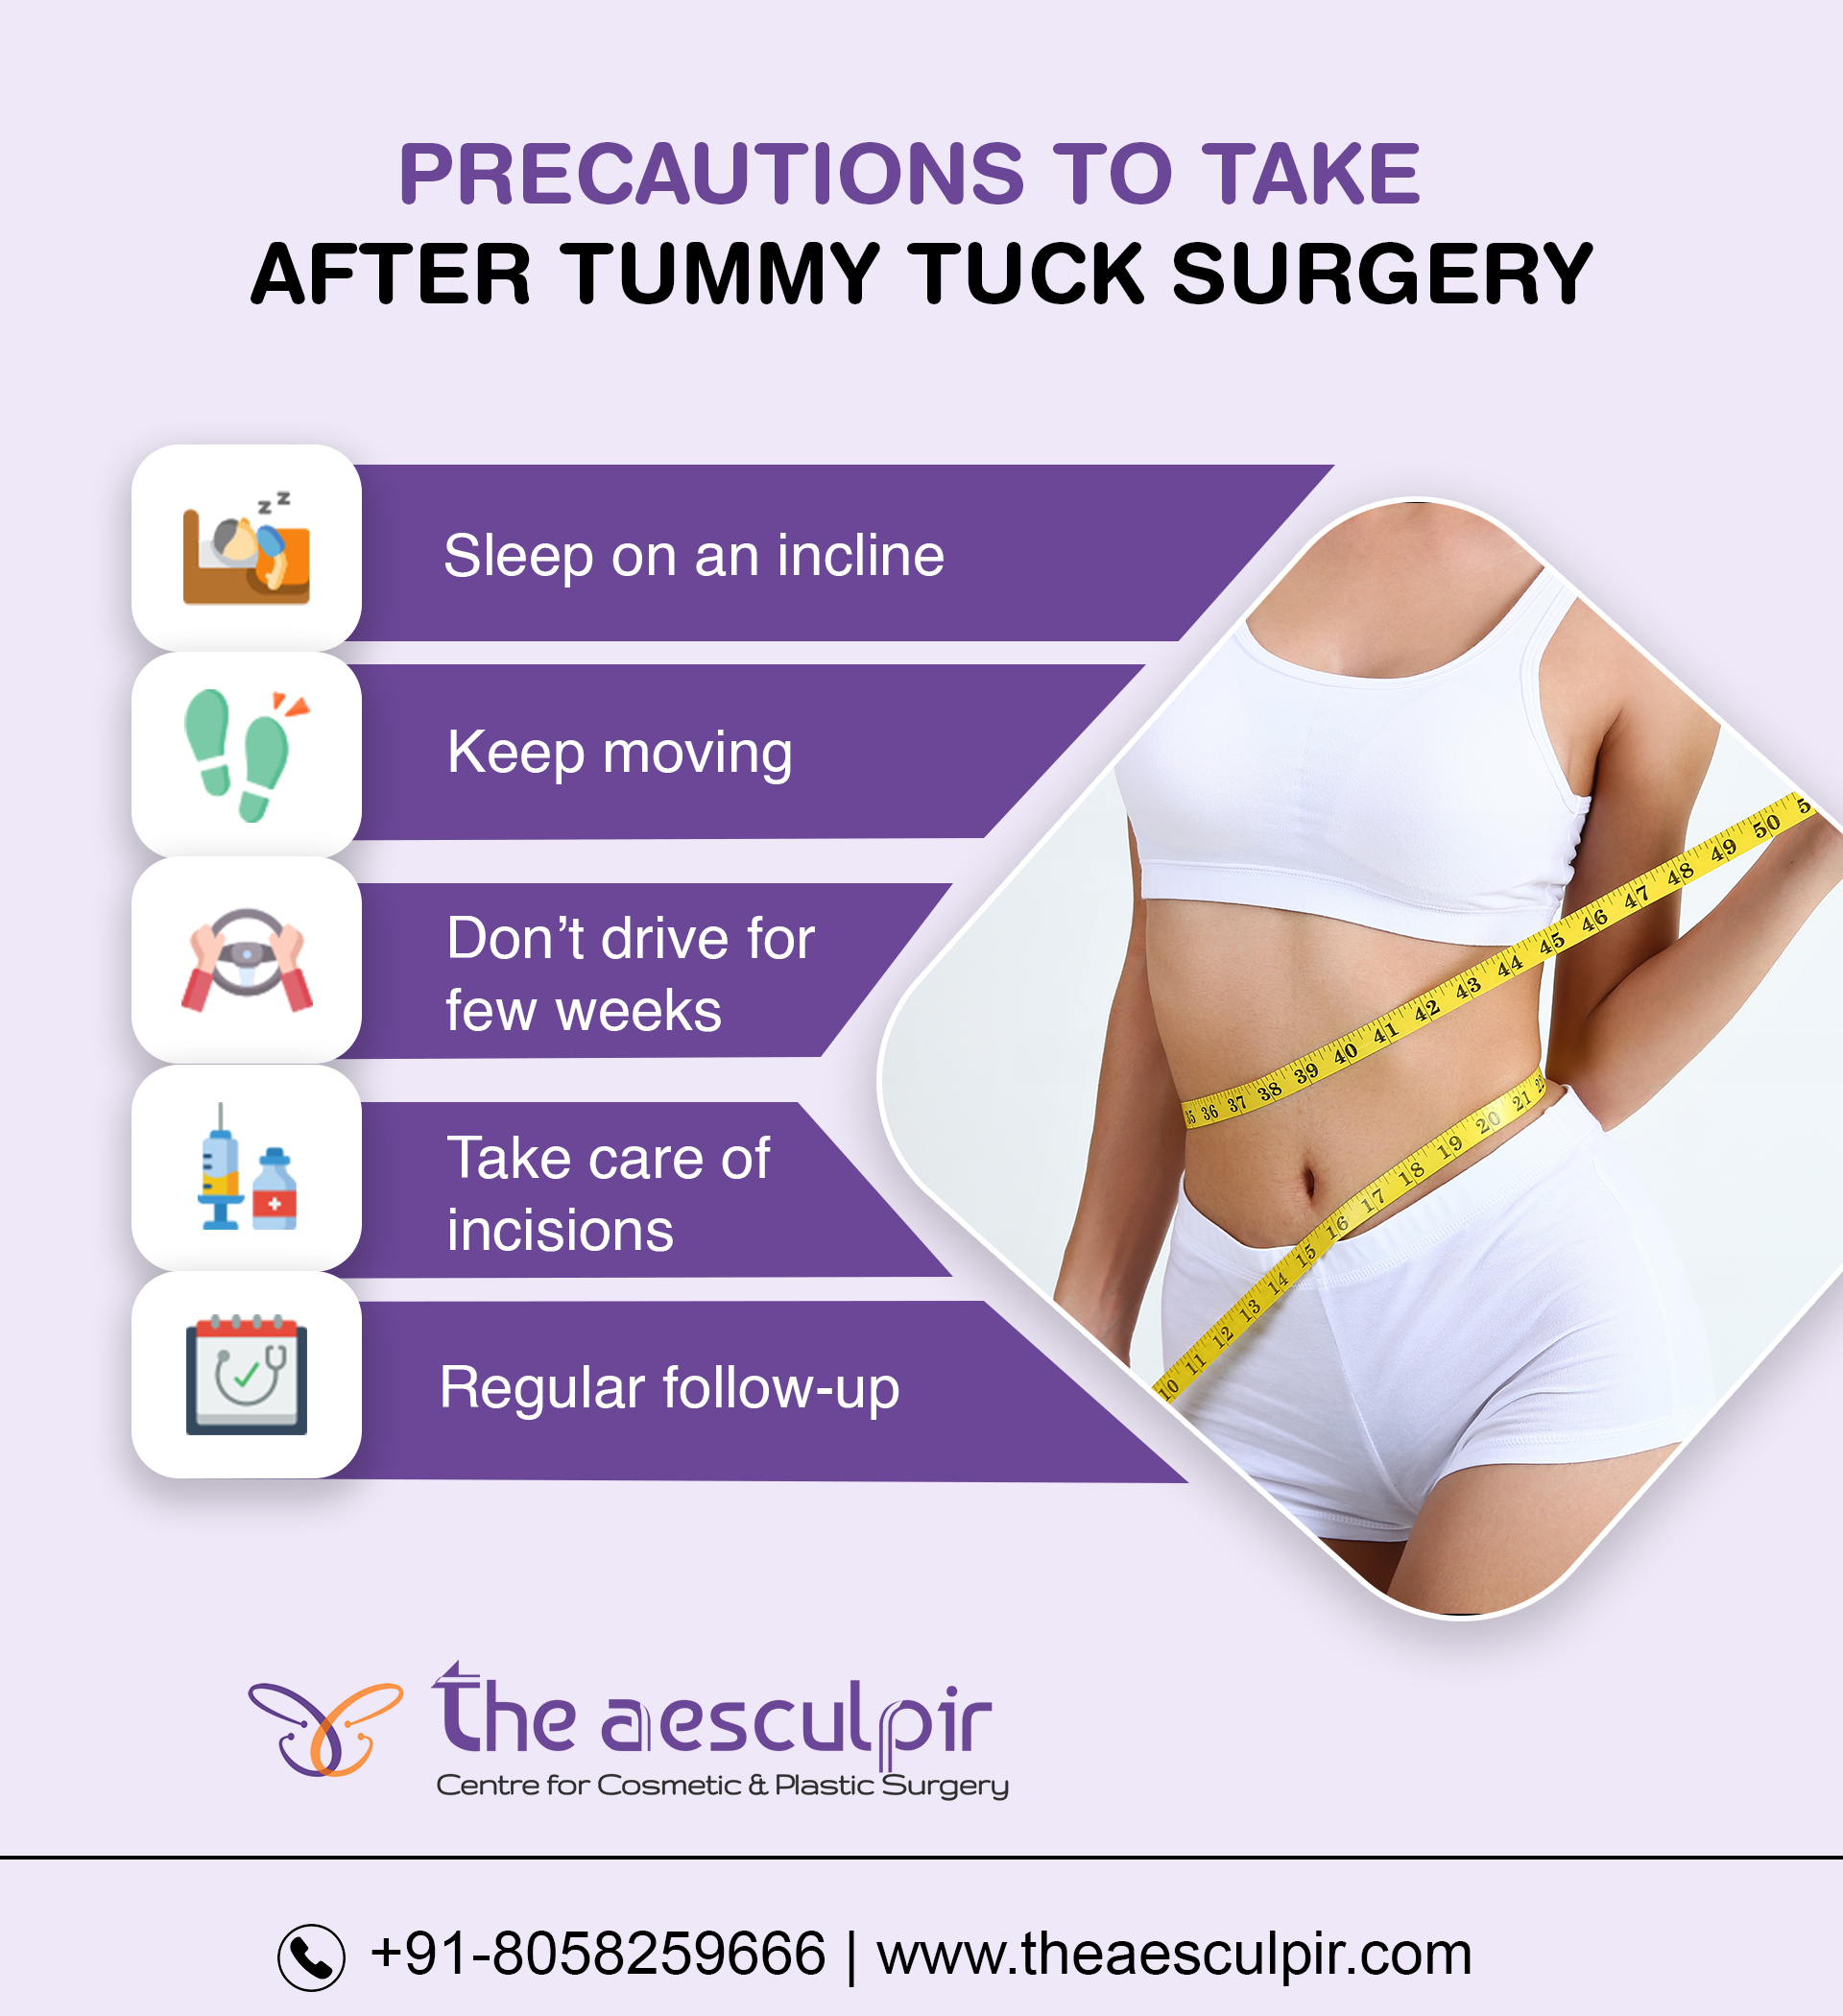 healing process day by day tummy tuck recovery